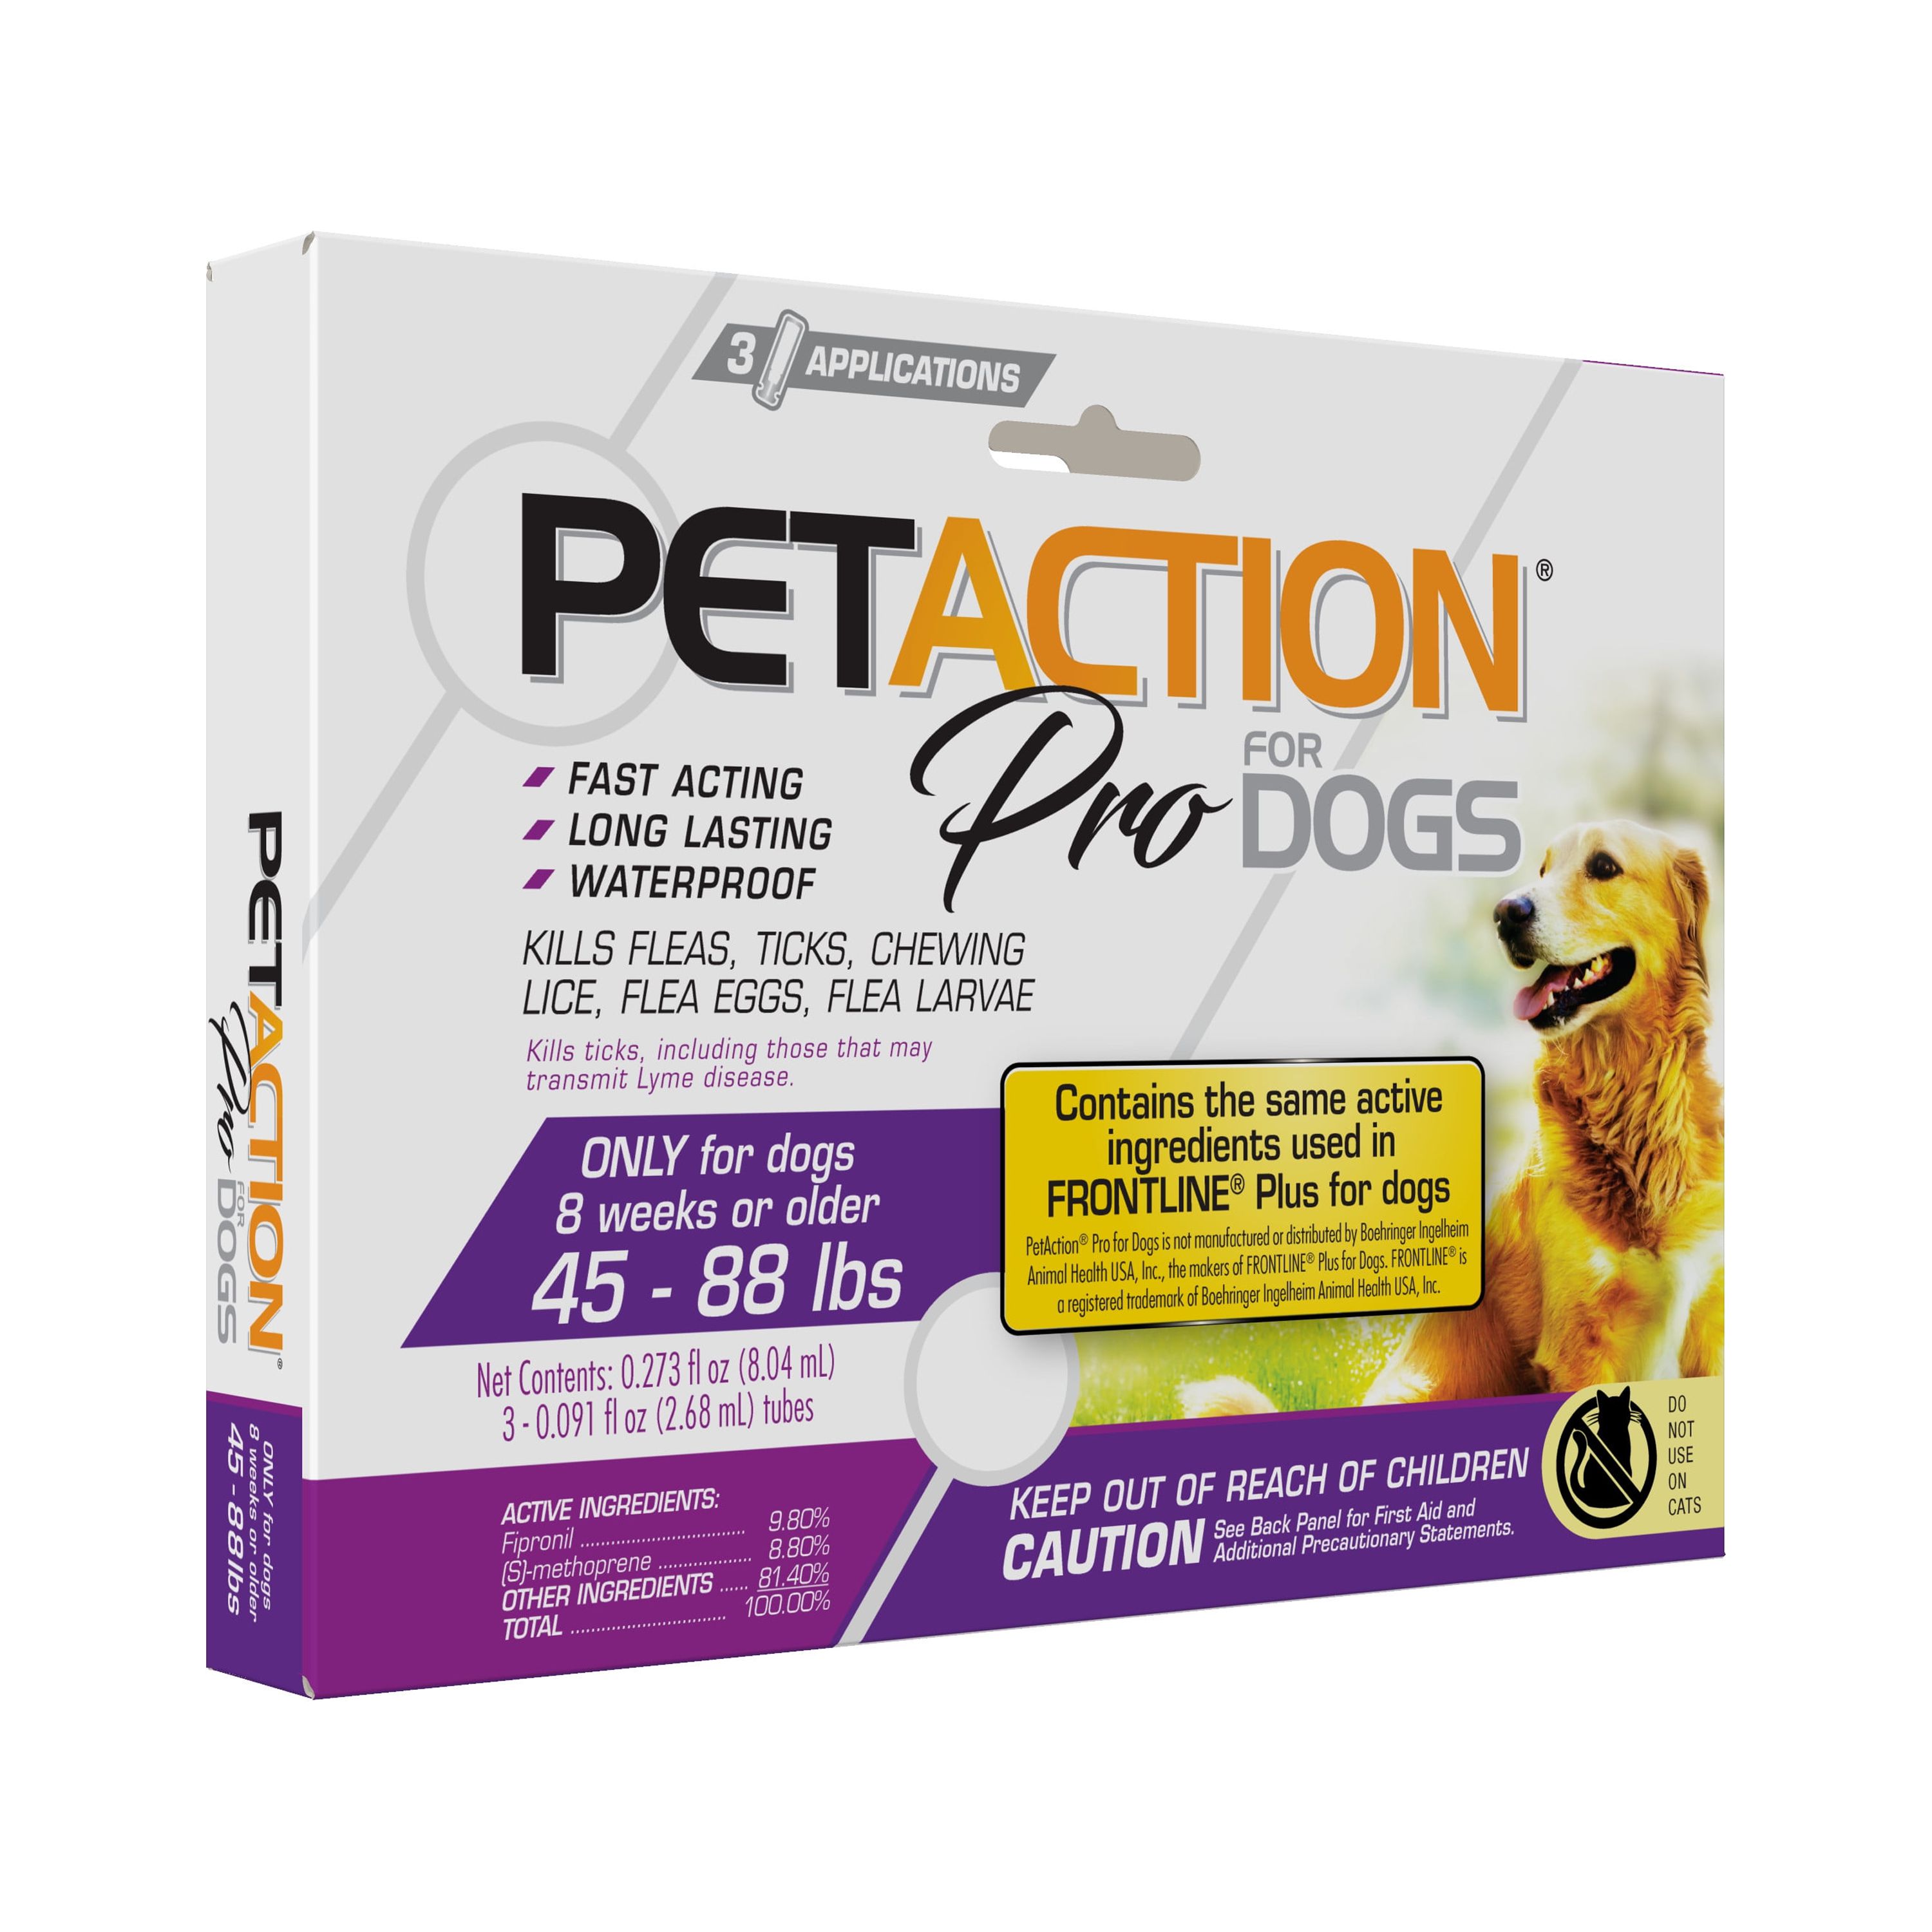 PETACTION PRO Flea & Tick Topical Treatment for Dogs 45-88 lbs, 3 Count - image 5 of 9